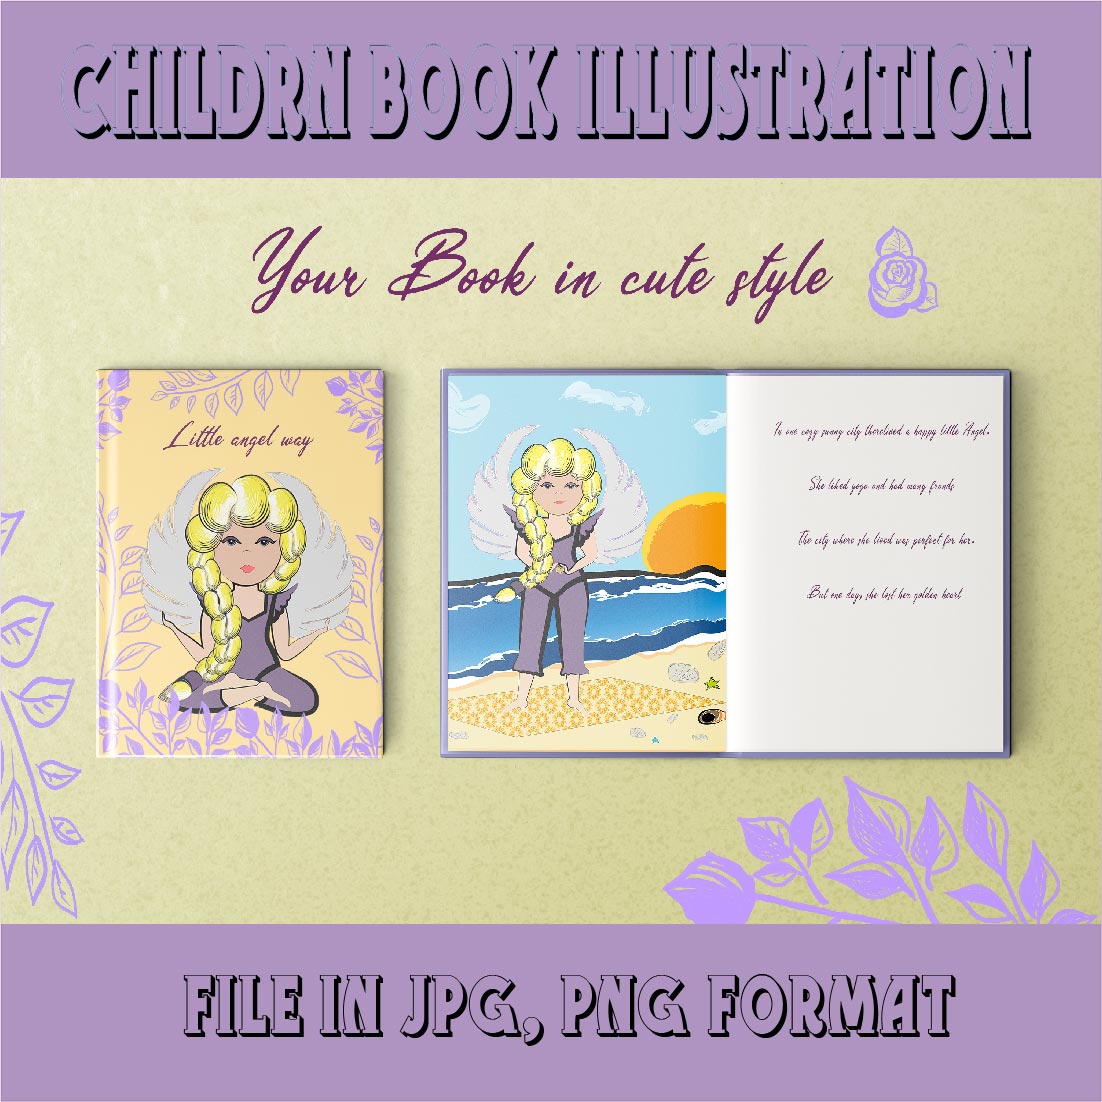 Cute Little Angel Character for Children's Fairy Tale cover image.